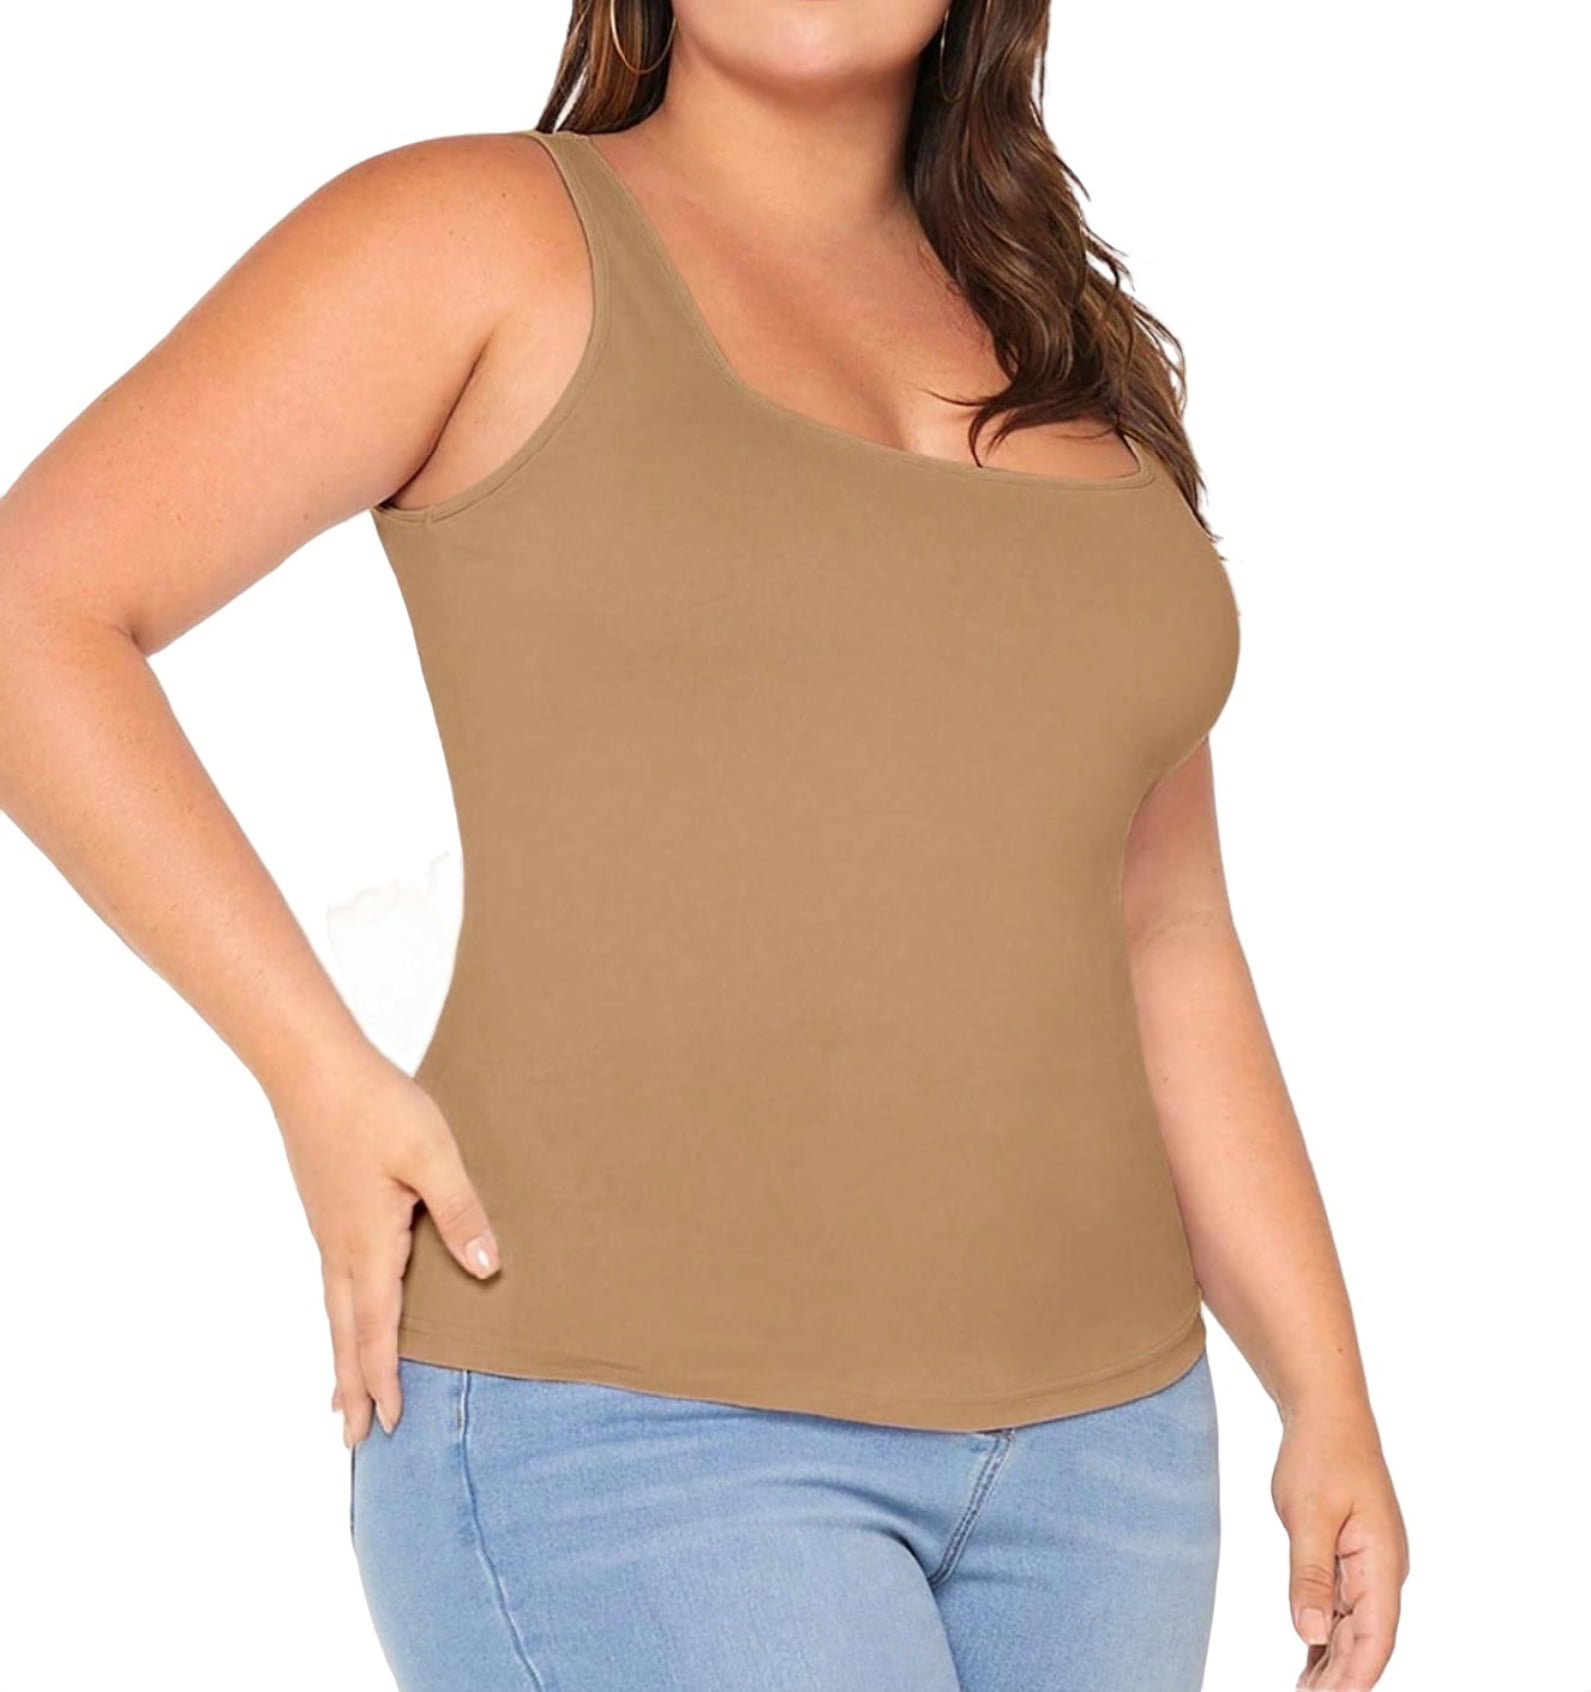 Casual Solid Scoop Neck Tank Black Plus Size Tank Tops & Camis (Women's)